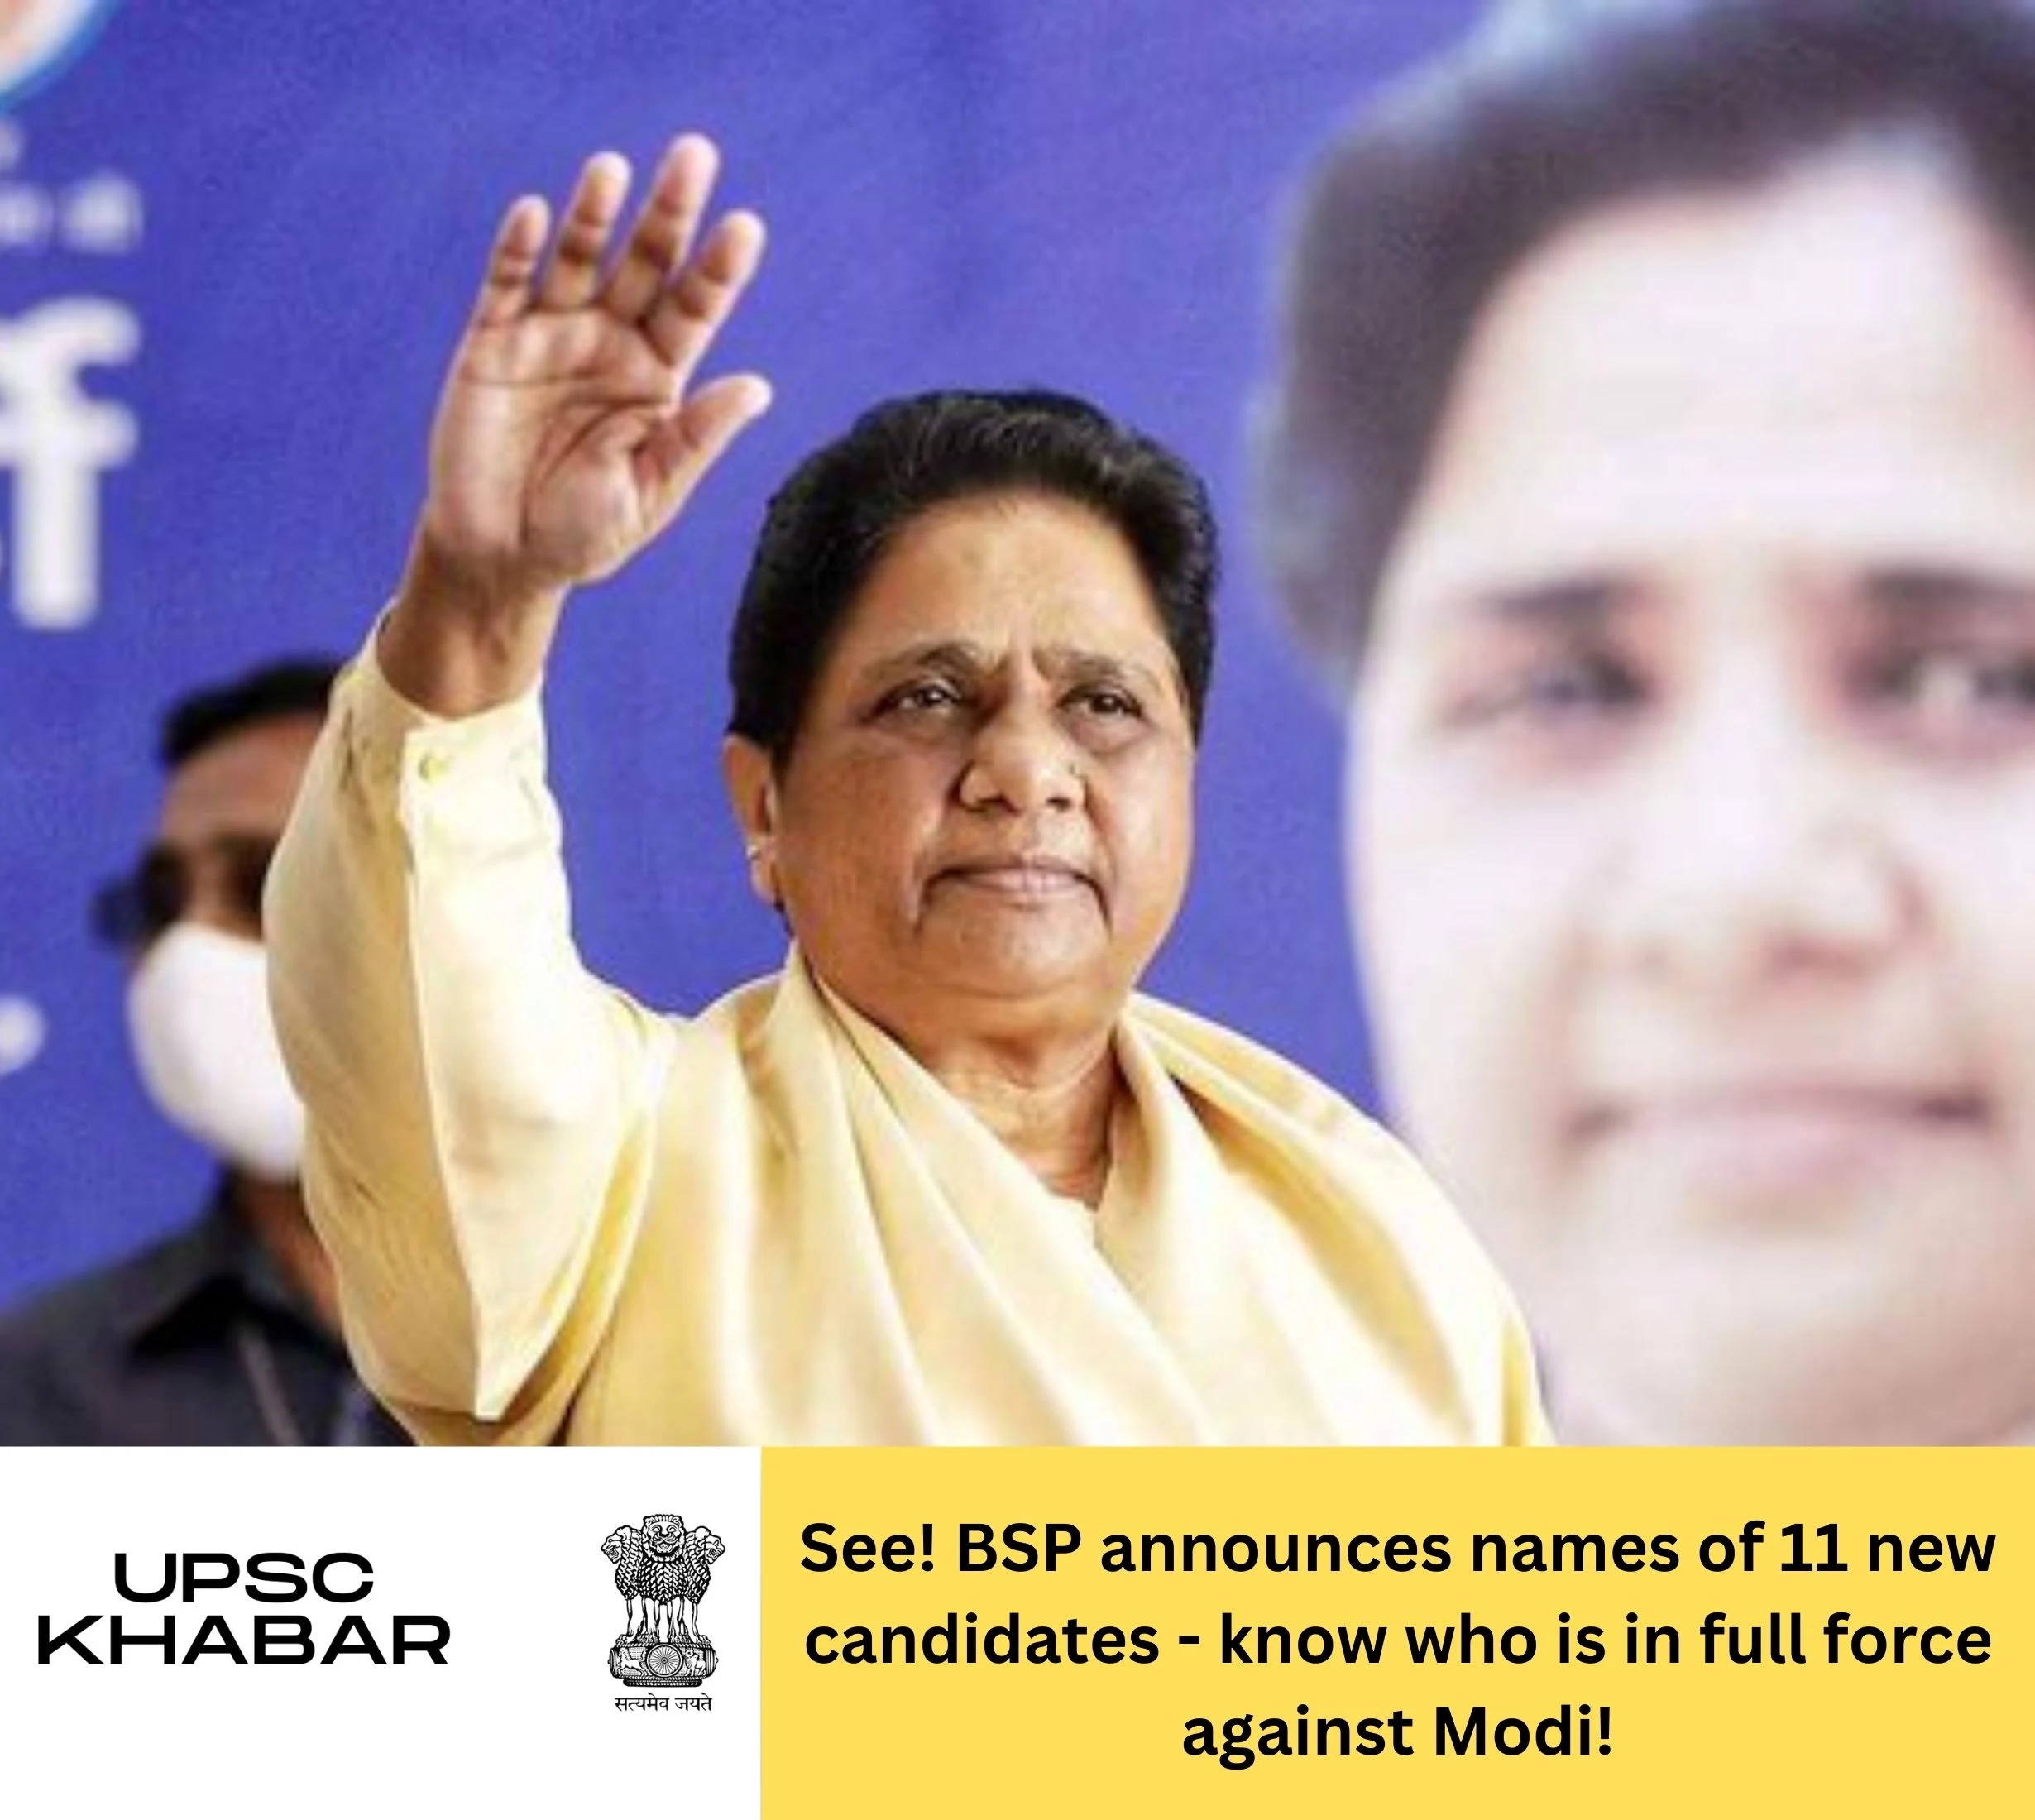 See! BSP announces names of 11 new candidates - know who is in full force against Modi!